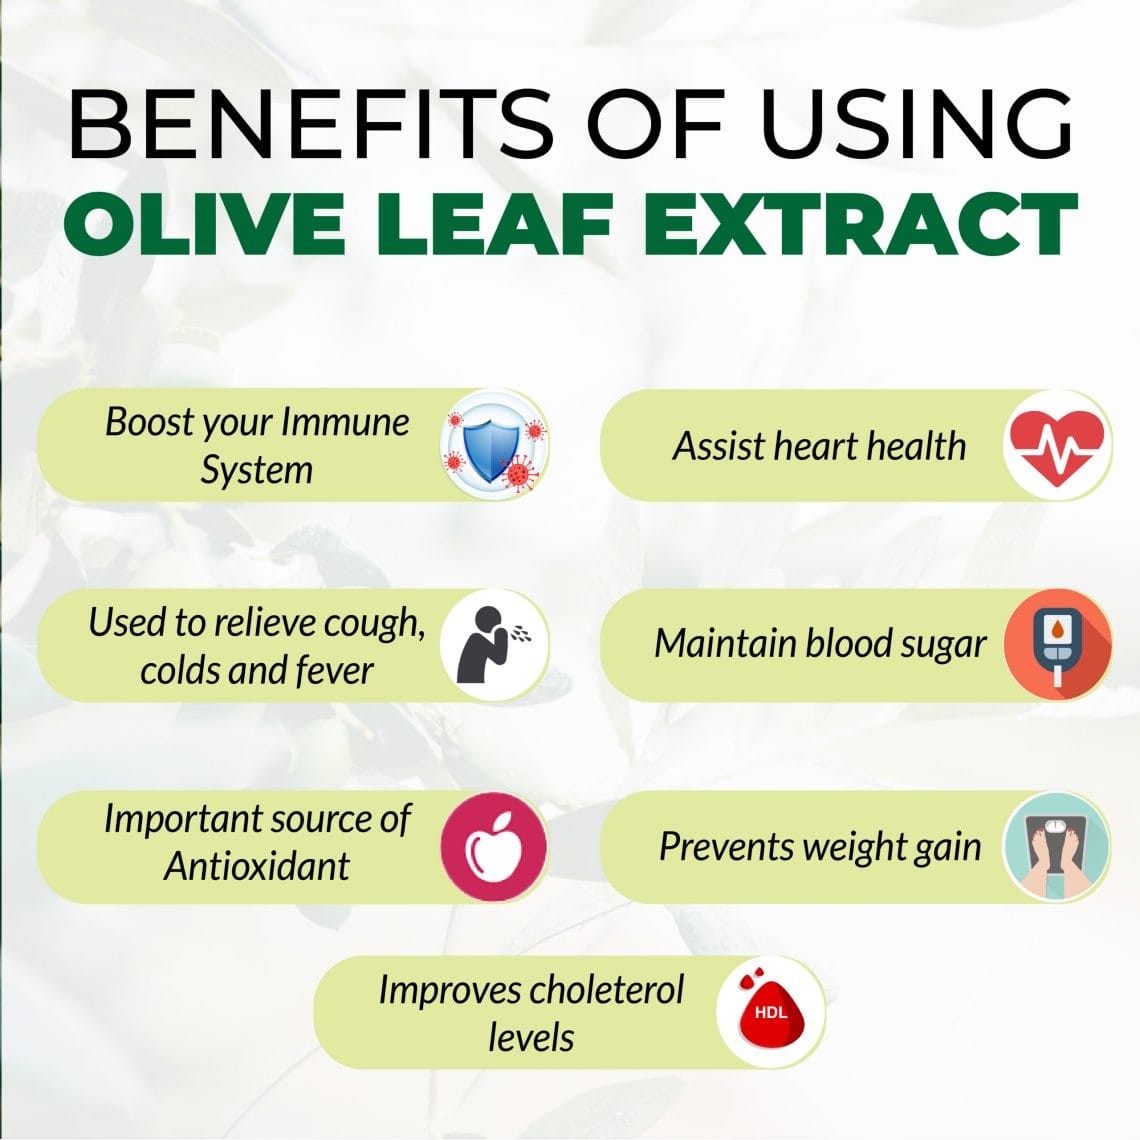 Benefits of using Olive Leaf Extract - 2